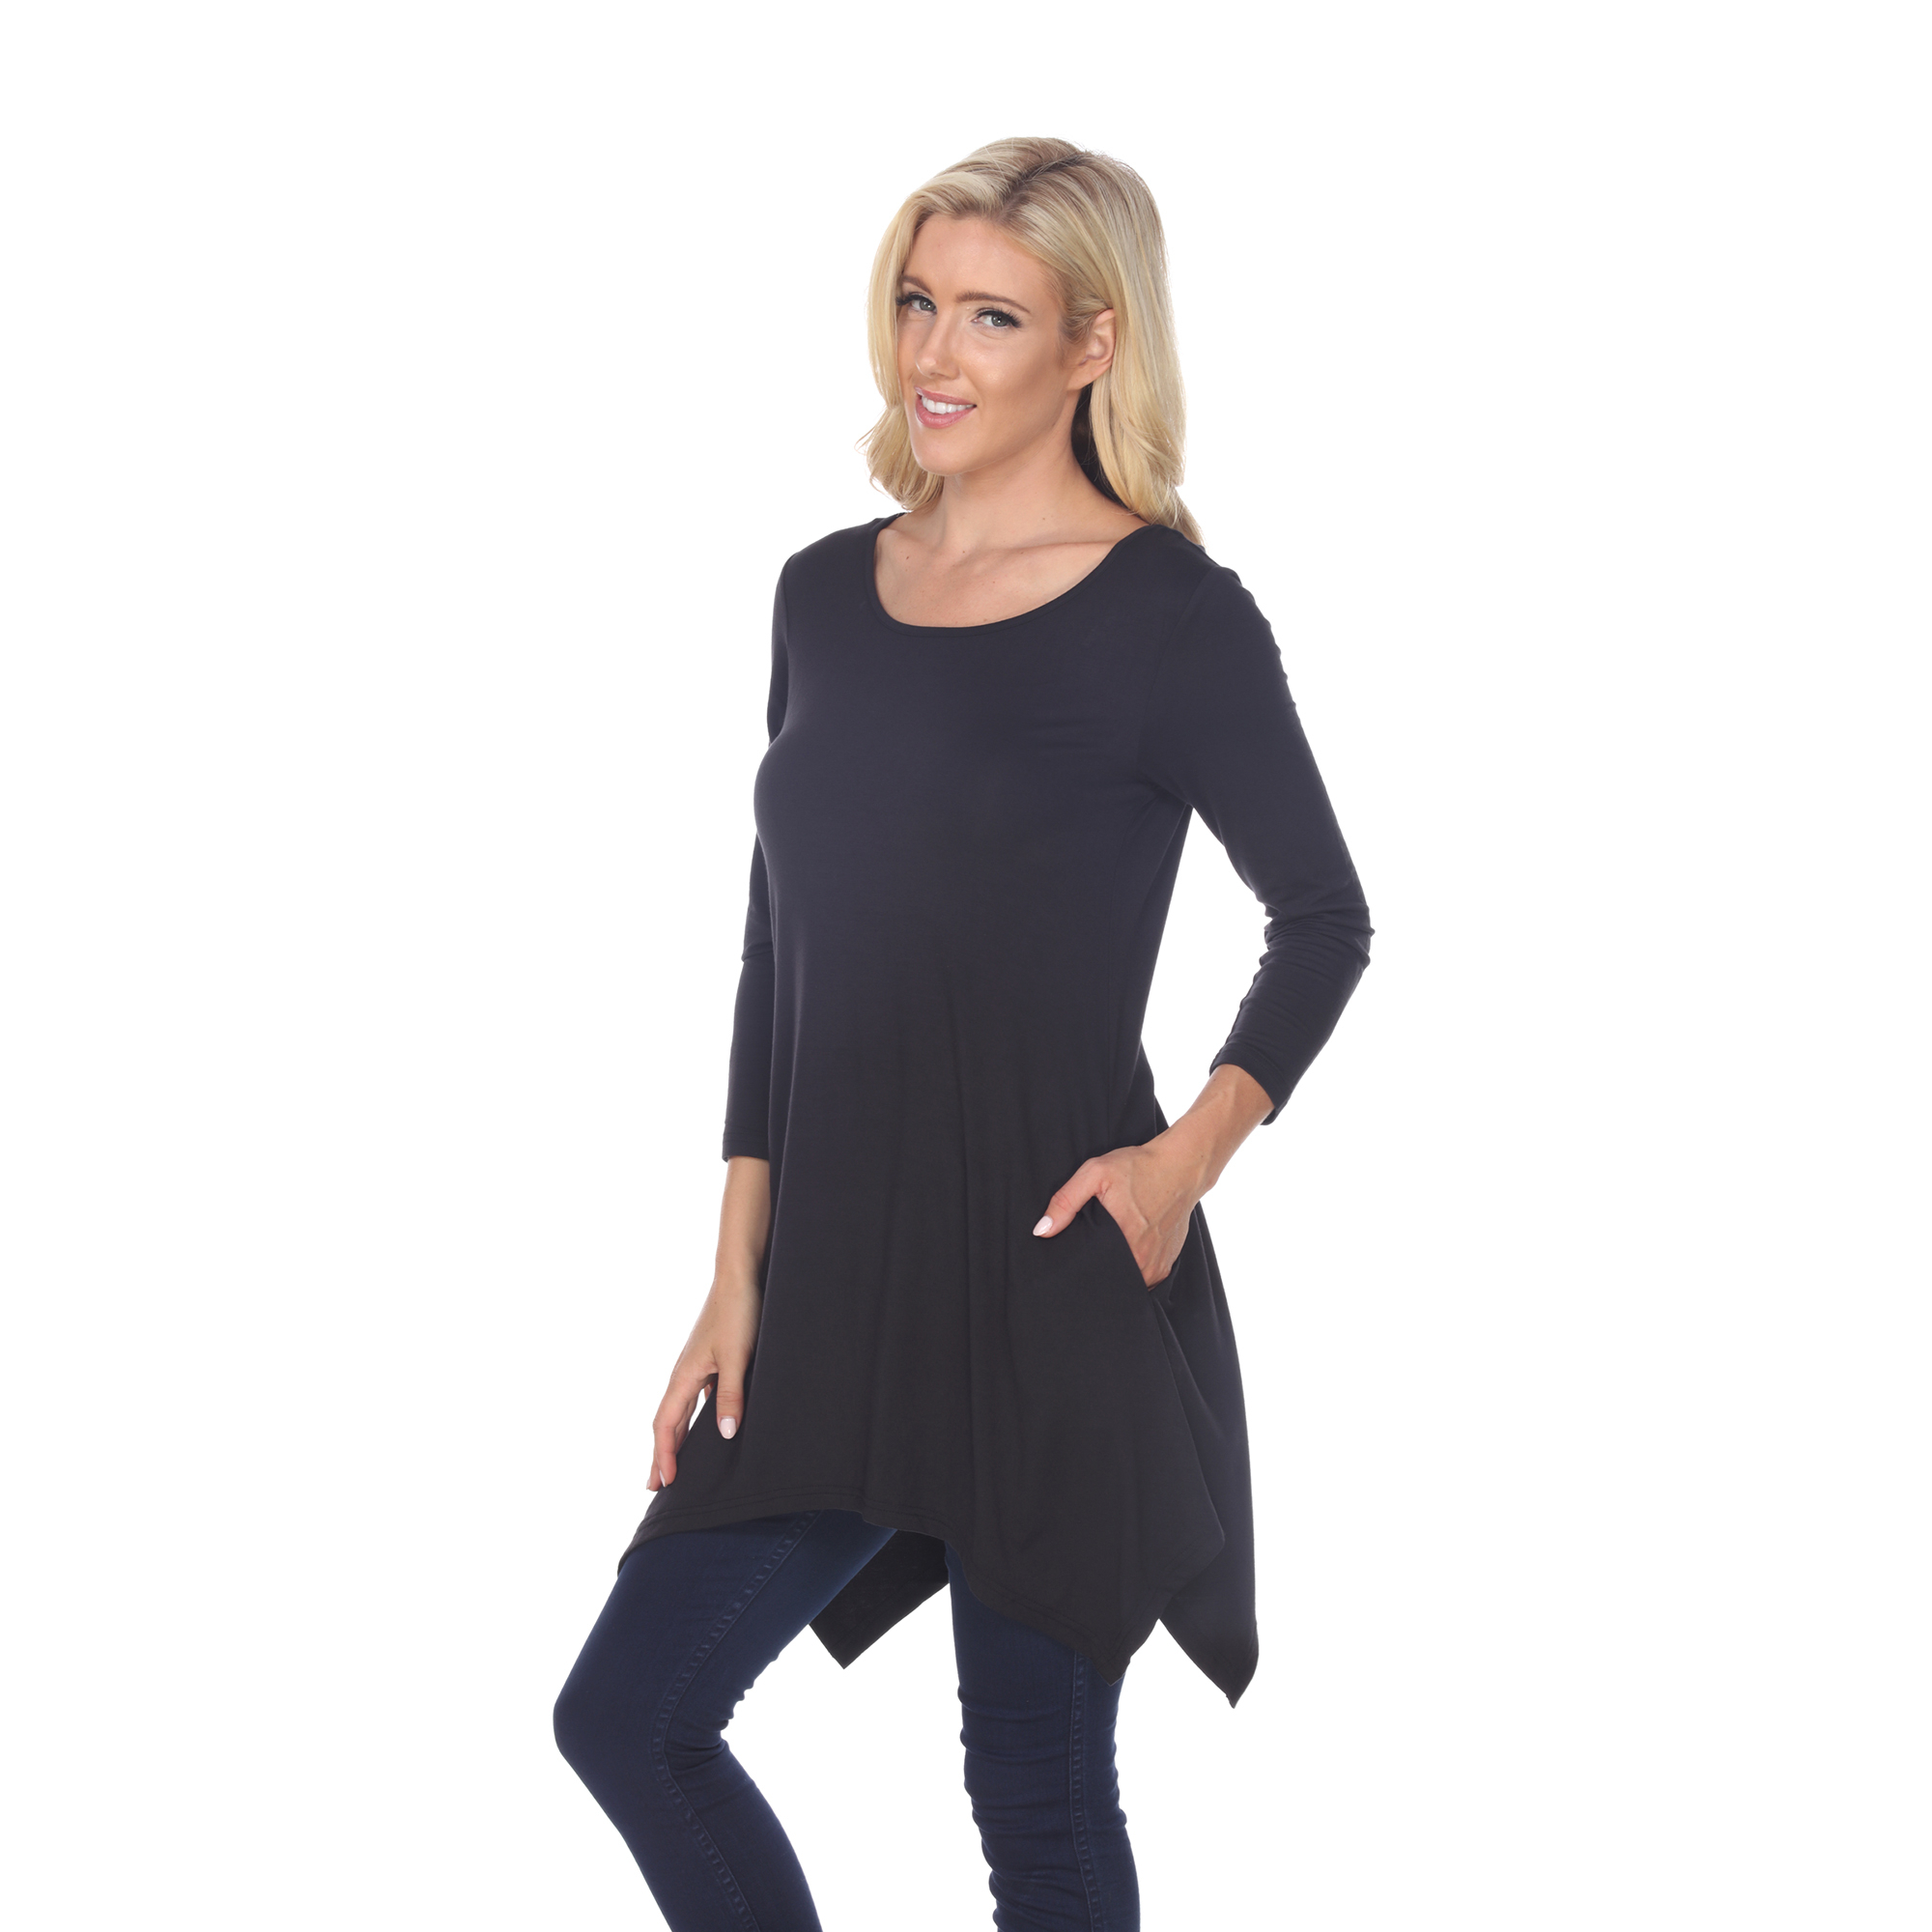 White Mark Women's Quarter Sleeve Tunic Top With Pockets - Black, 3X